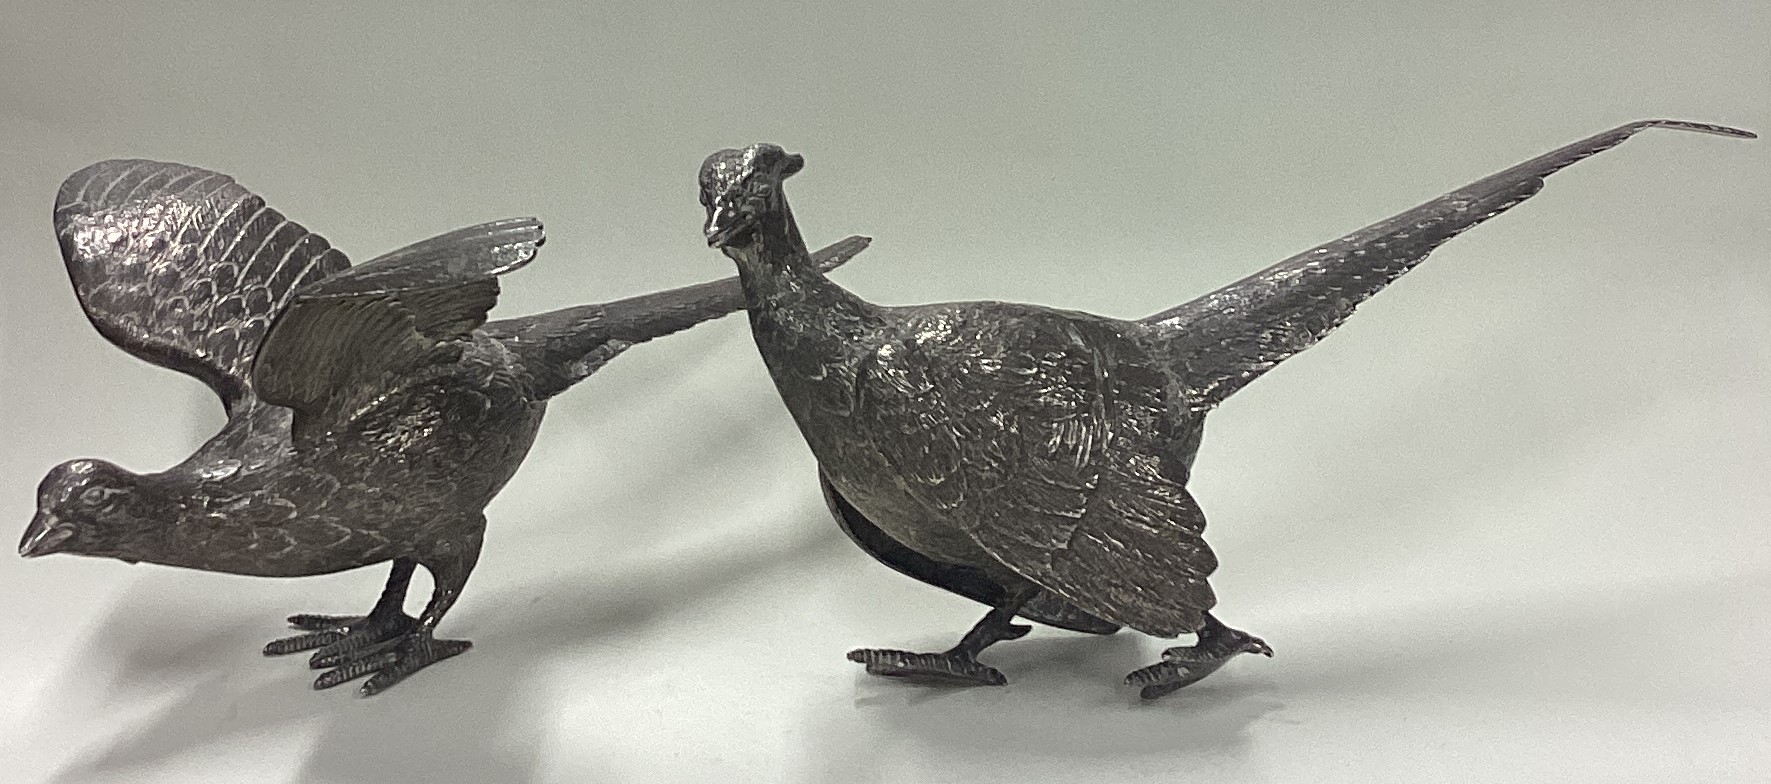 A large pair of textured silver pheasants. By Israel Freeman & Son.